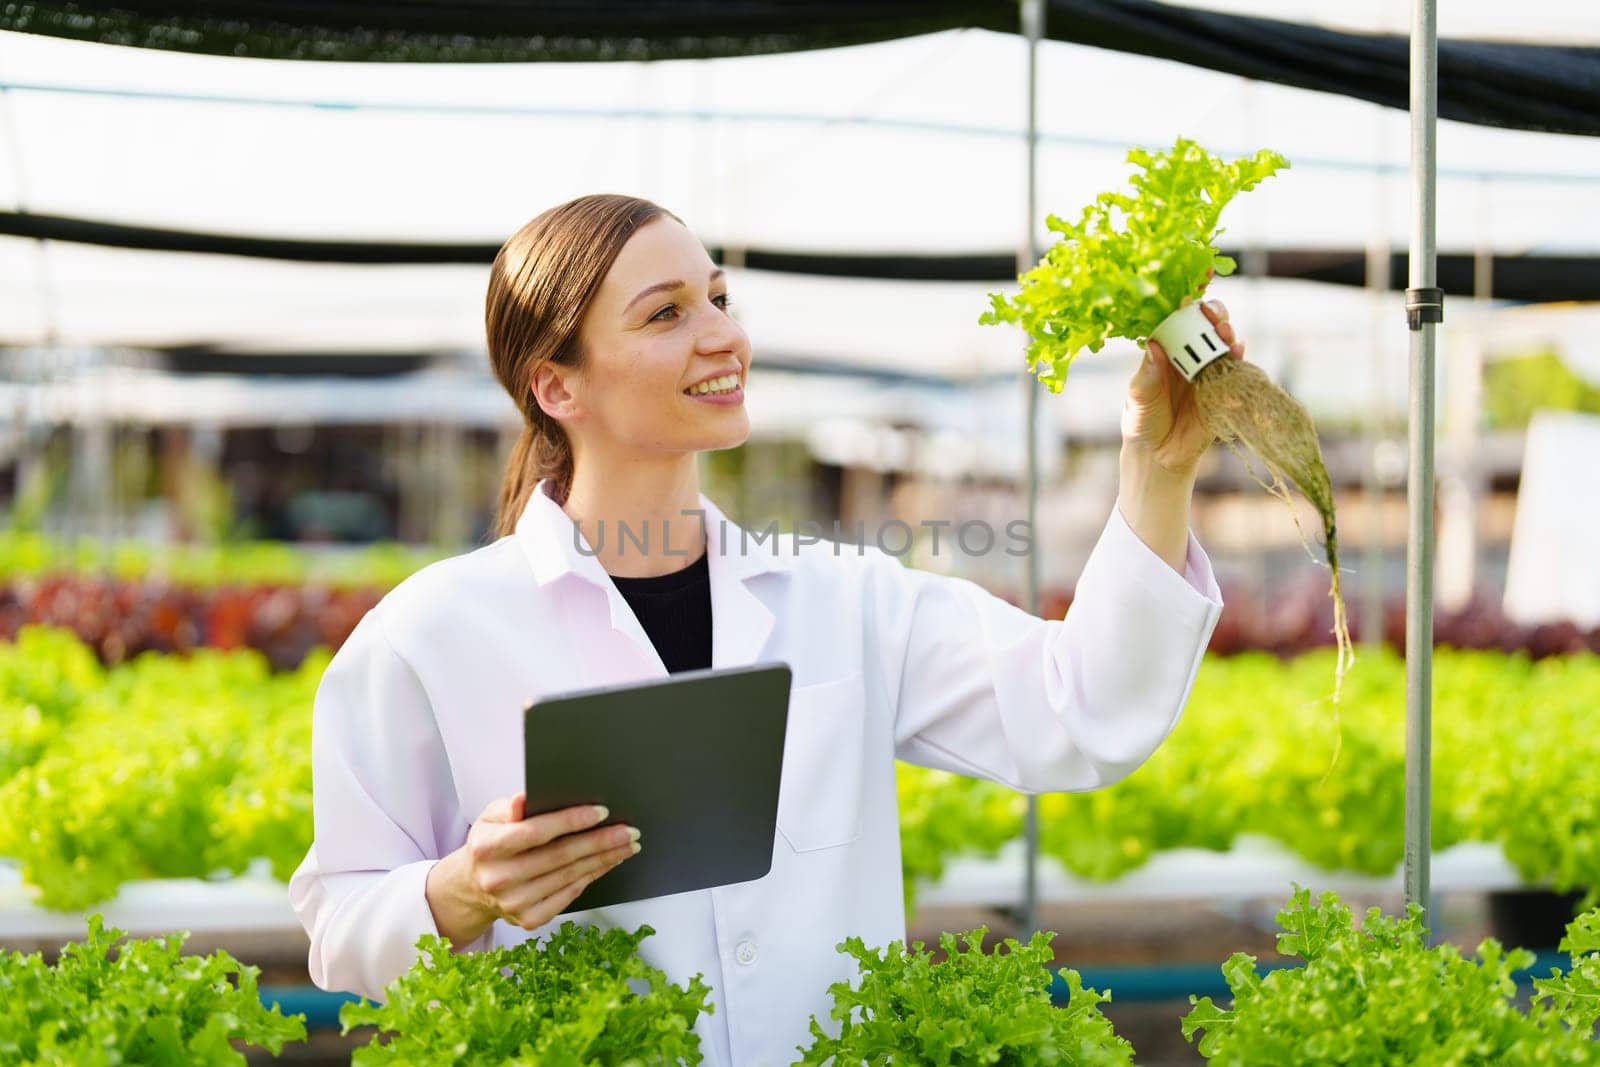 Woman Farmer harvesting vegetable and audit quality from hydroponics farm. Organic fresh vegetable, Farmer working with hydroponic vegetables garden harvesting, small business concepts. by Manastrong